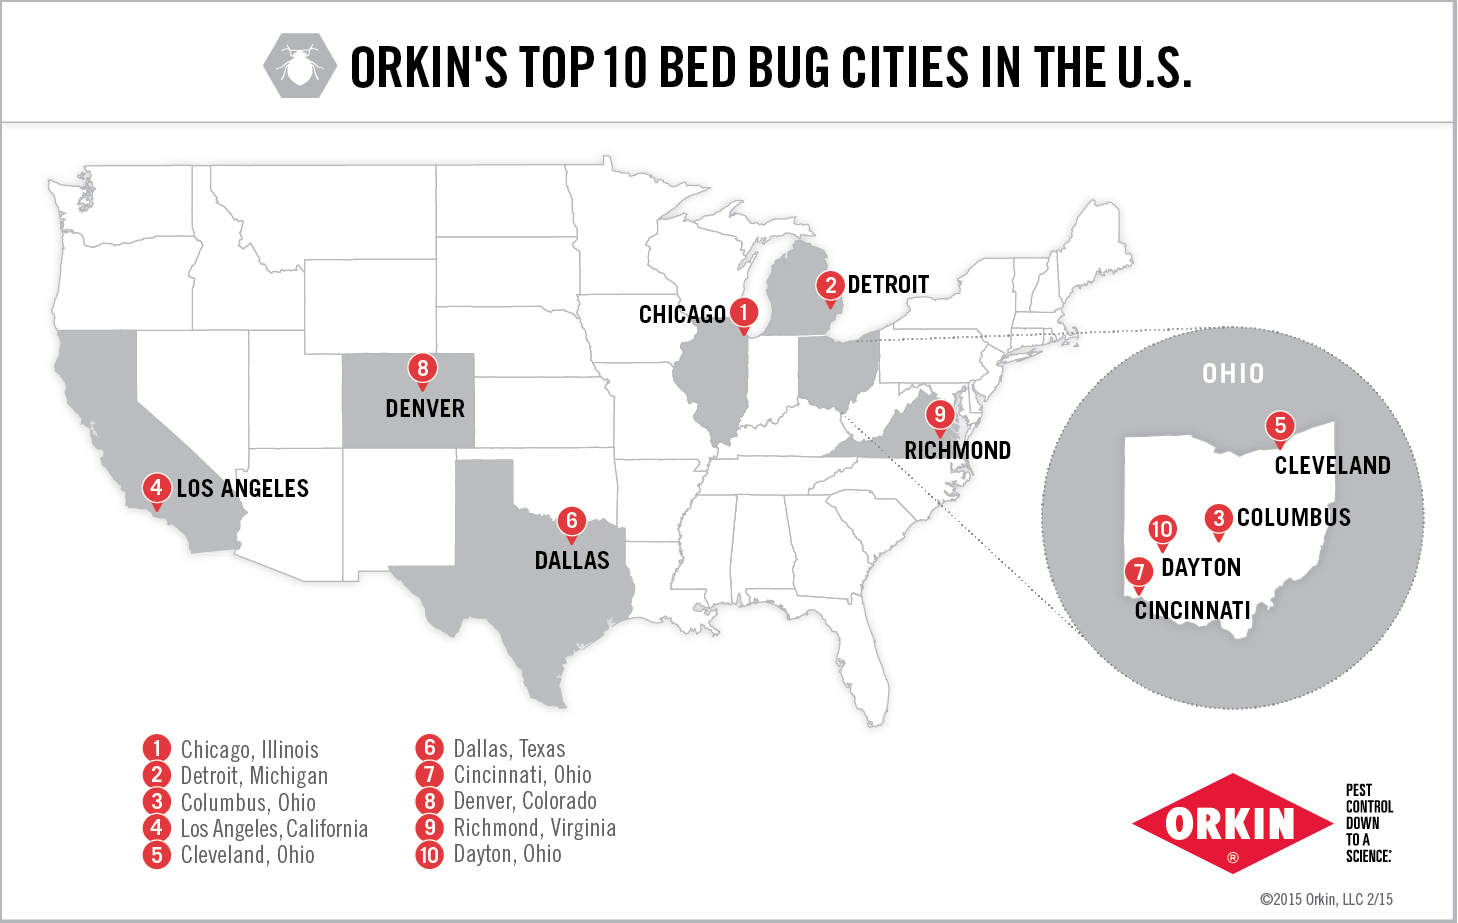 List of Cities Most in Need of Bed Bug Control & Management